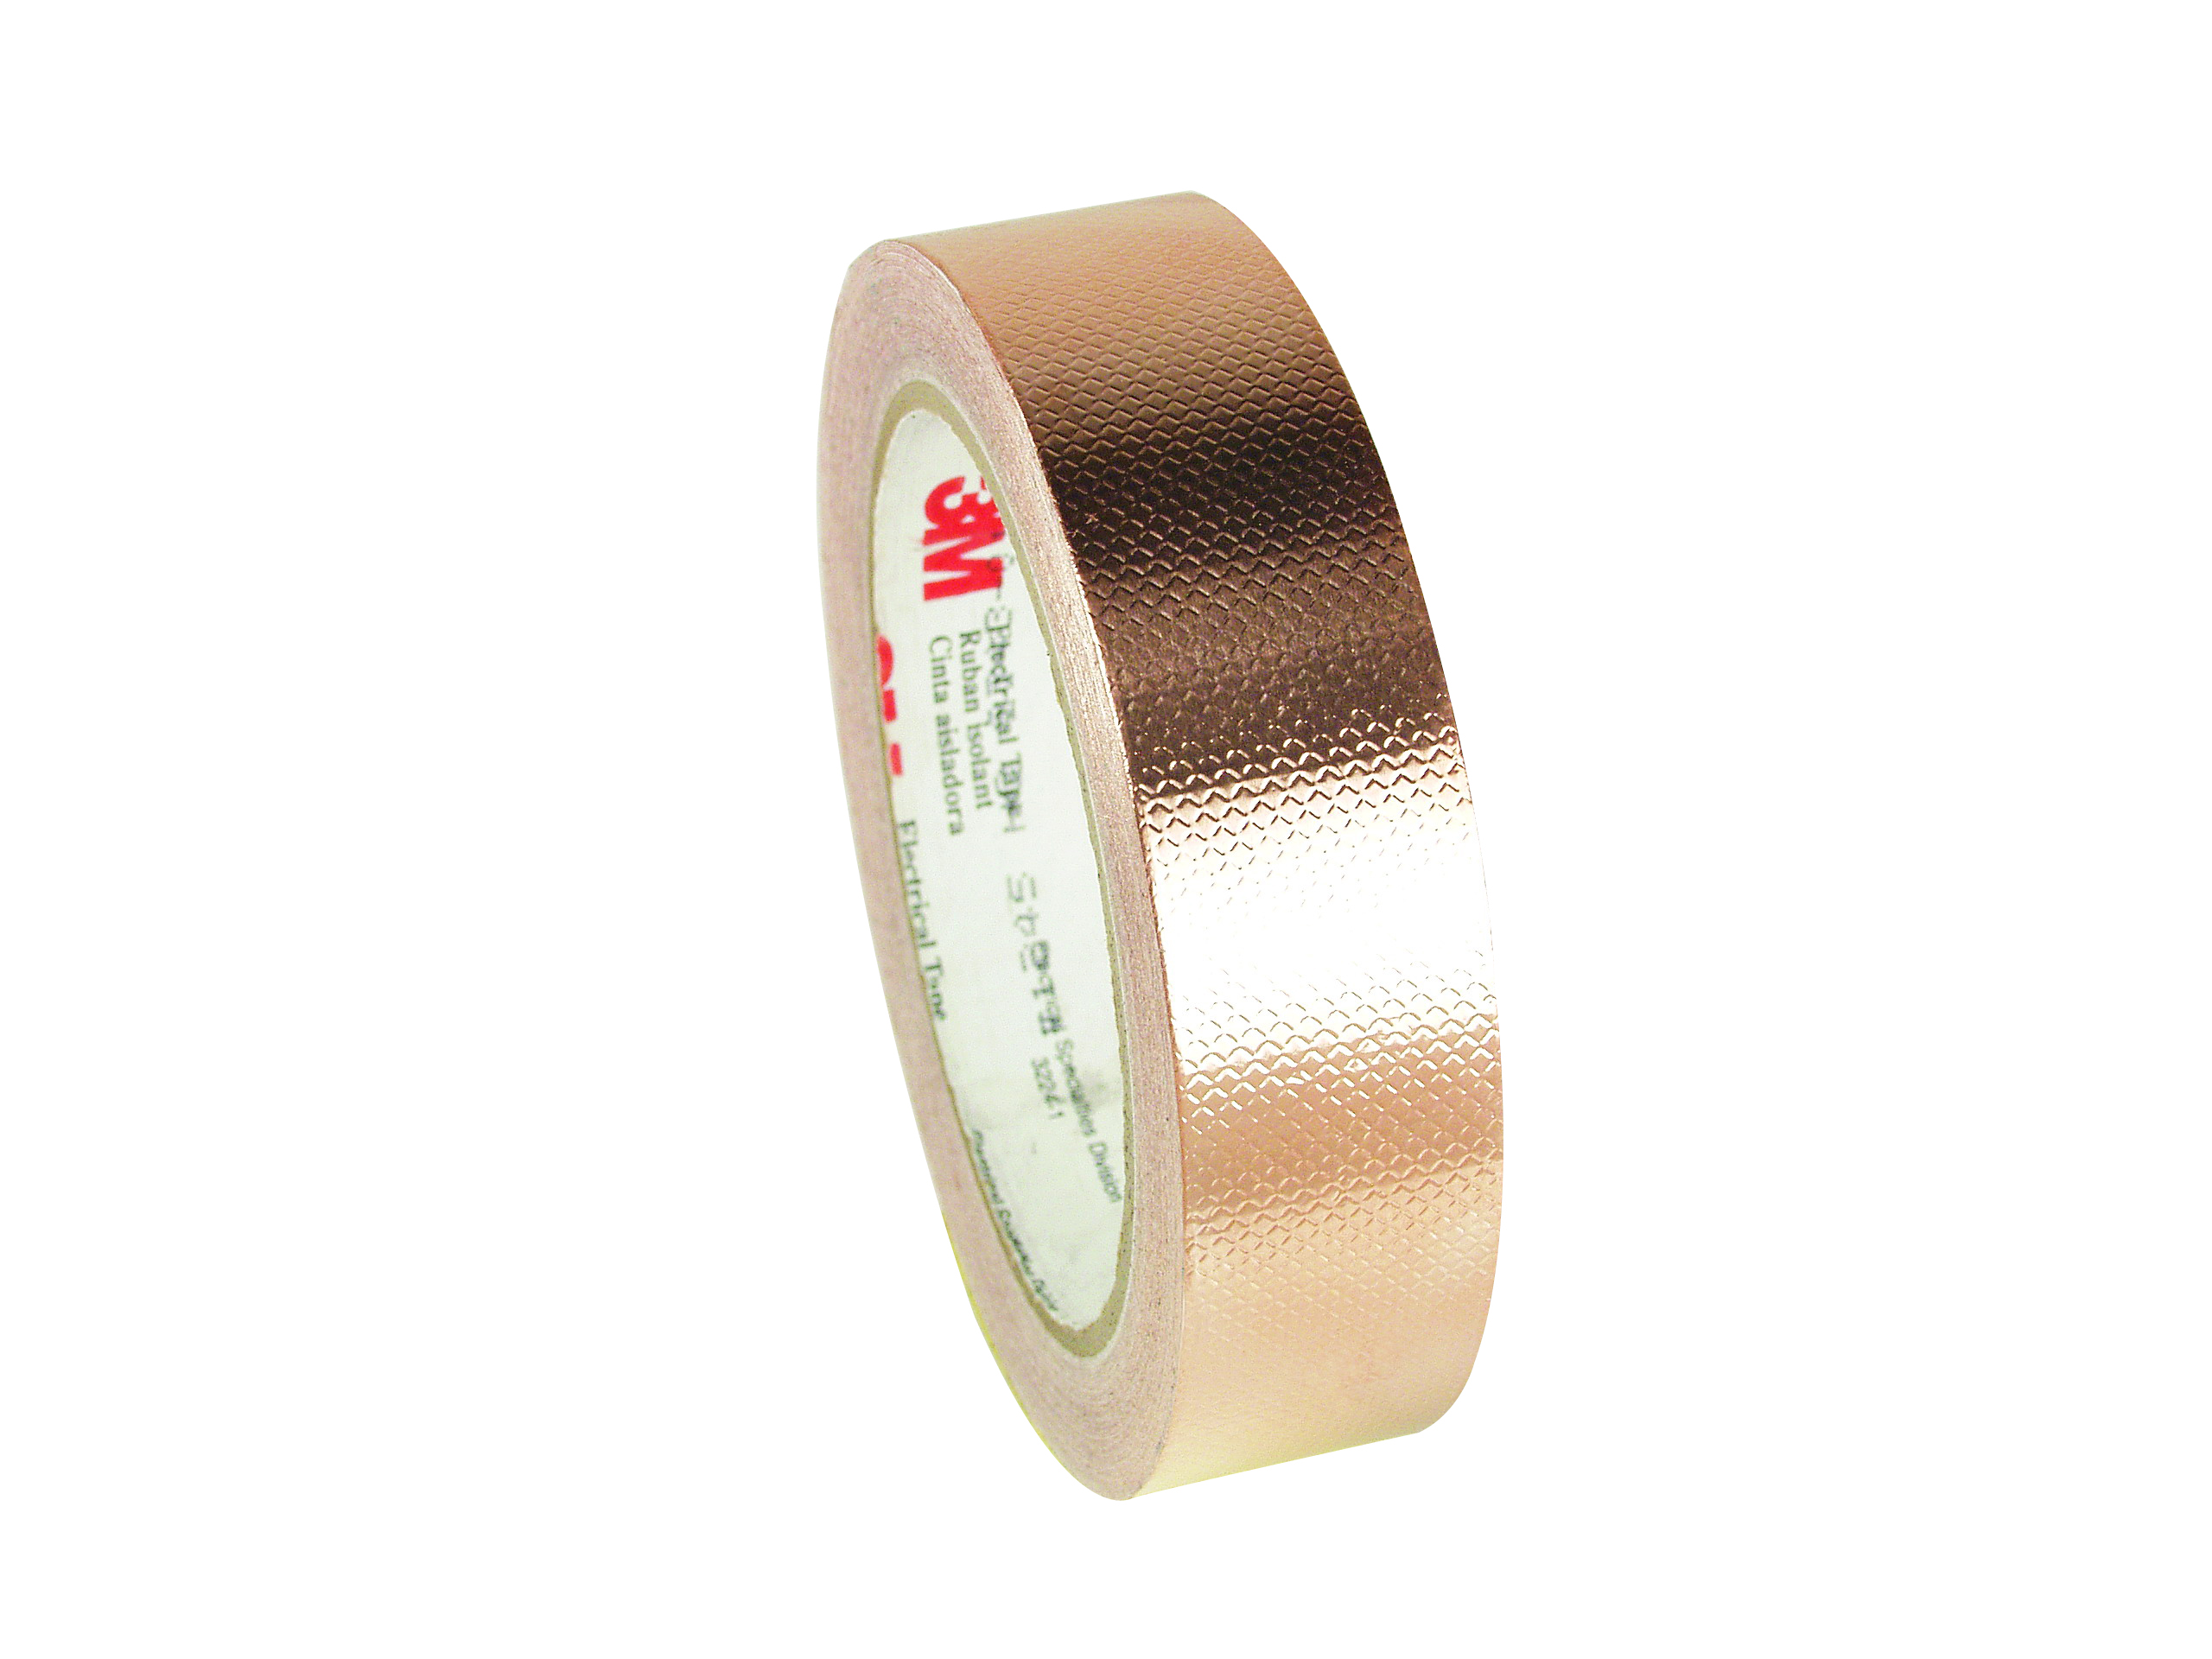 00051128609378 3M™ Embossed Copper Foil EMI Shielding Tape 1245, 23 in x  36 yd, in Paper Core, Roll/Case Aircraft products na 9342995